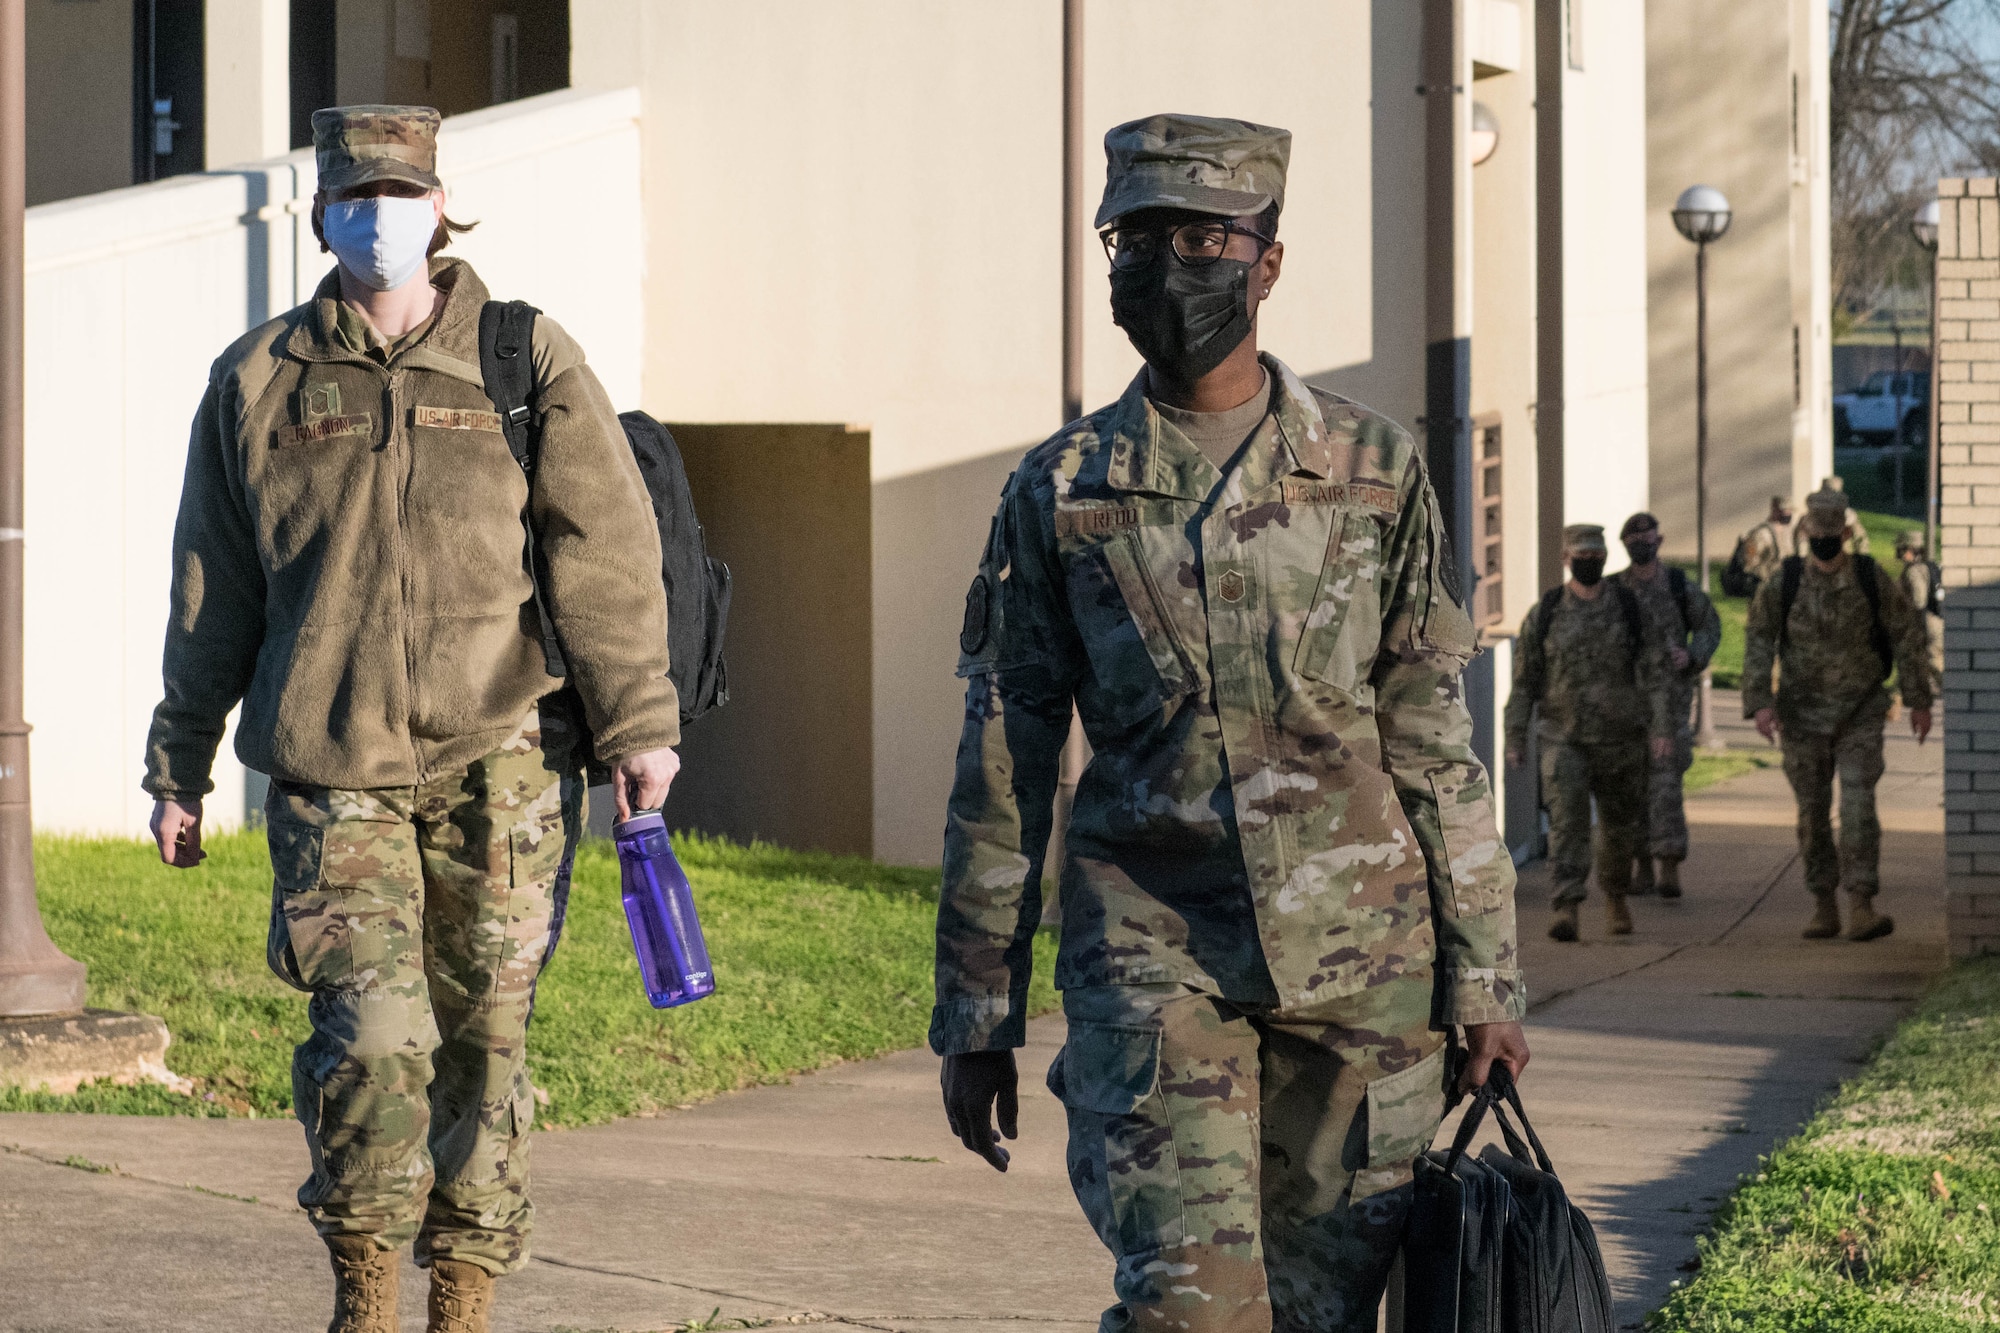 Senior Noncommissioned Officer Academy students walk to class March 4, 2021, on Maxwell Air Force Base's Gunter Annex. After nearly a year of only virtual classes, SNCOA welcomed back its first in-residence class this month. (U.S. Air Force photo by Airman 1st Class Cody Gandy)